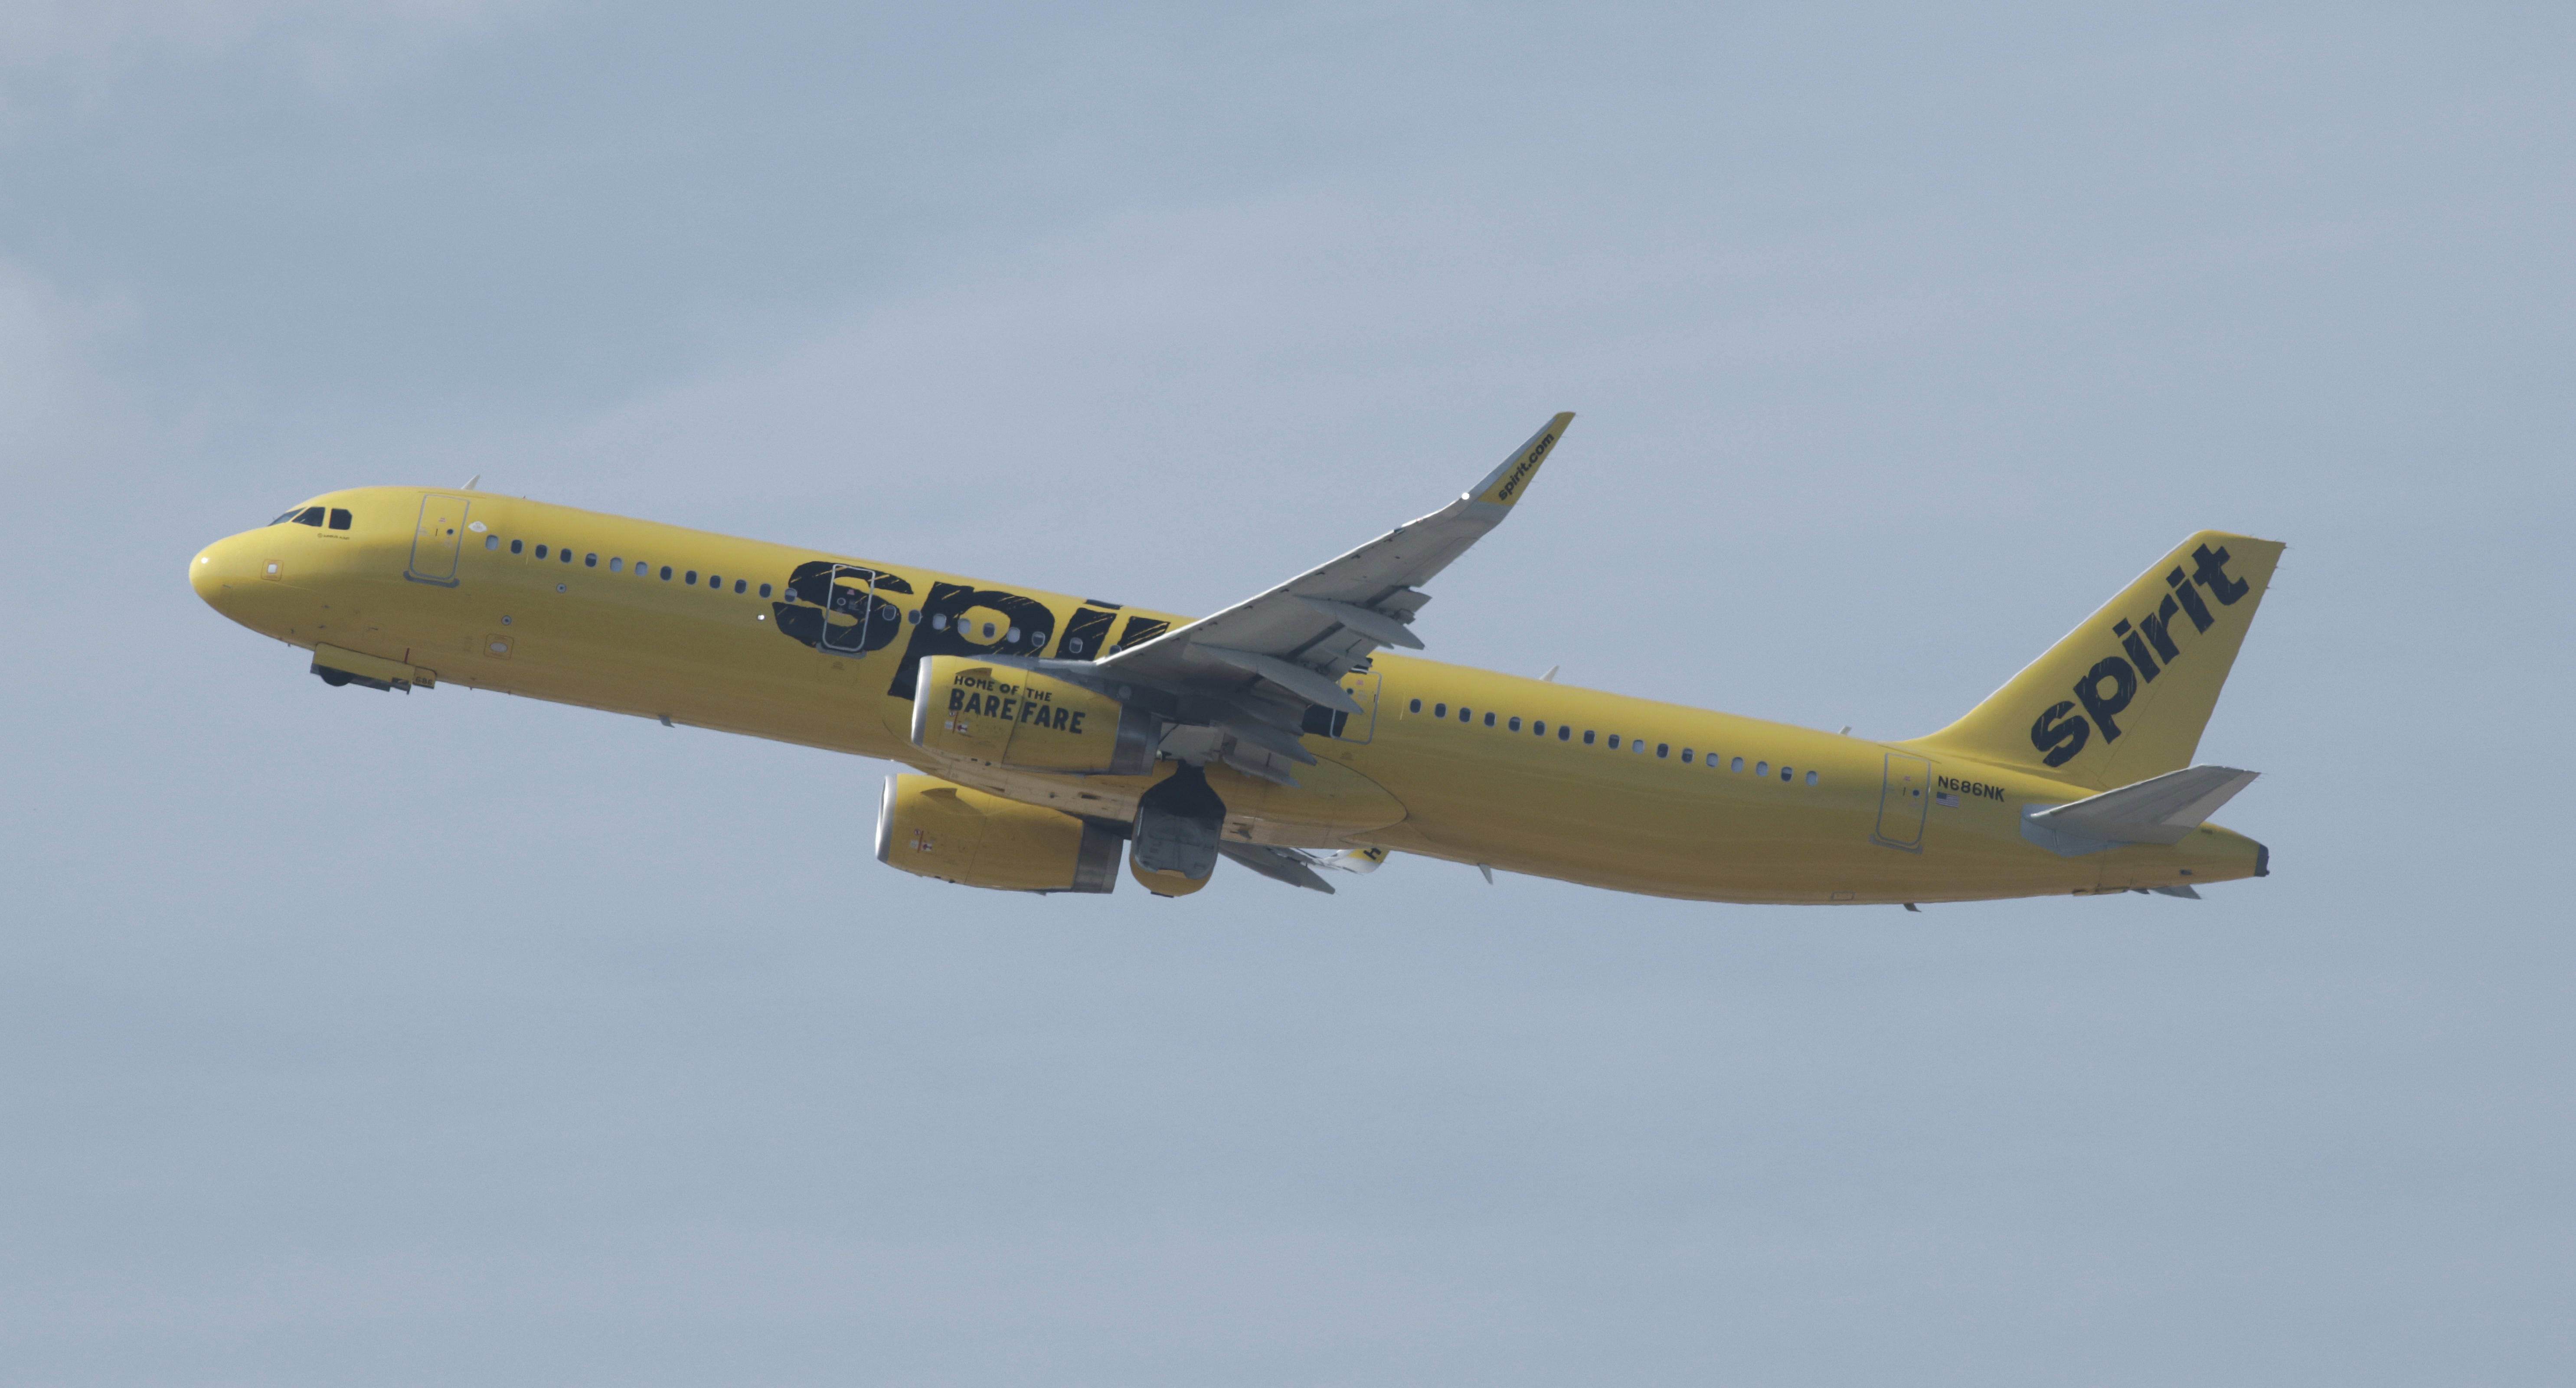 Spirit Airlines wants travelers to book and change flights by WhatsApp